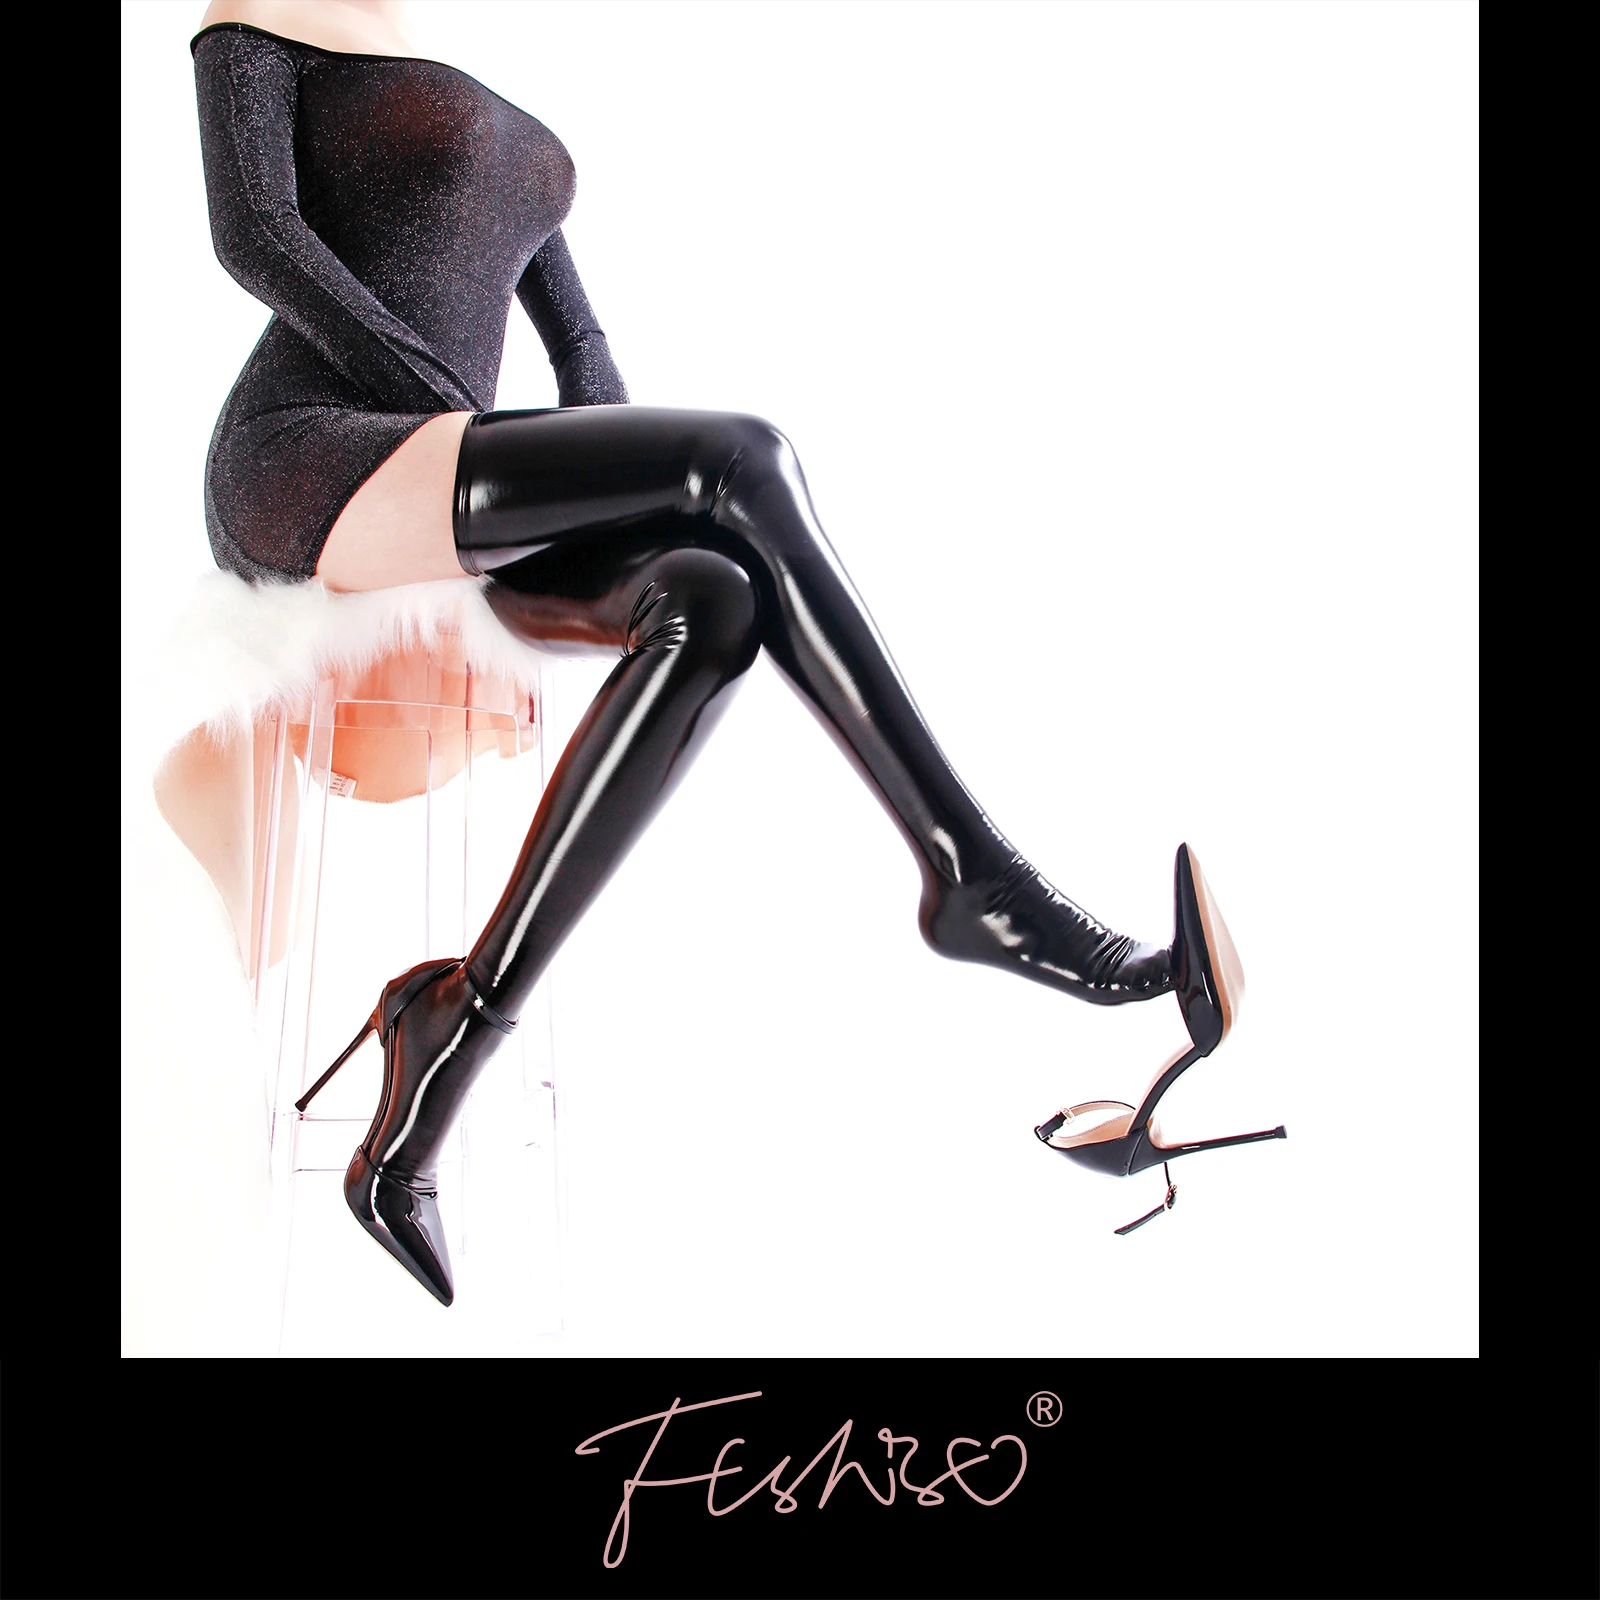 Ftshist Sexy Wetlook Tight-Highs Stockings Shiny Metallic Elastic Over-The-Knee Patent Leather Socks Latex Fetish Accessories